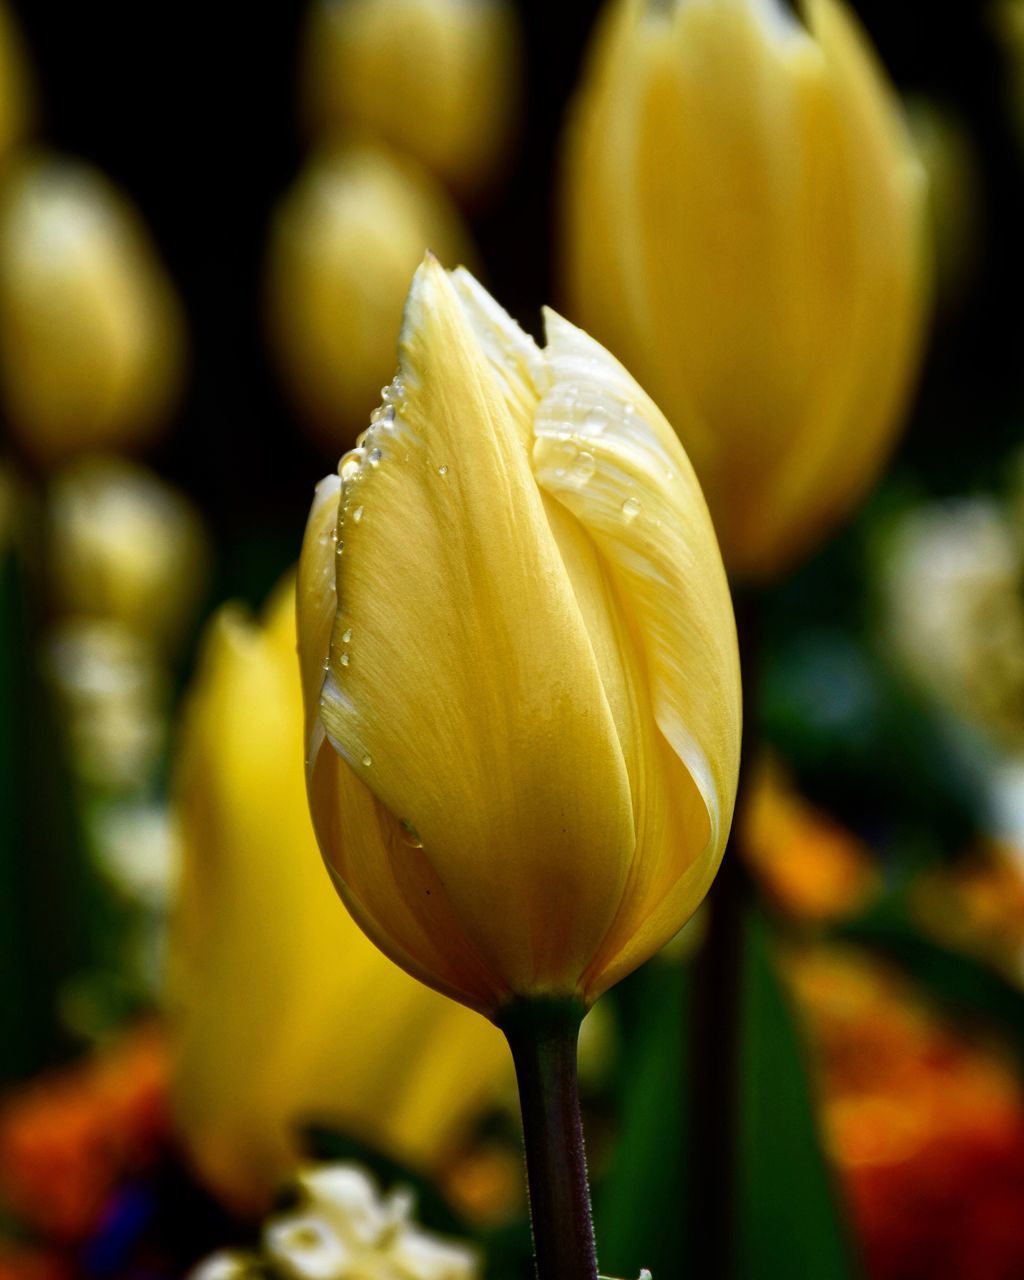 flower, petal, freshness, flower head, fragility, close-up, focus on foreground, beauty in nature, growth, single flower, blooming, nature, rose - flower, tulip, in bloom, plant, stem, yellow, blossom, botany